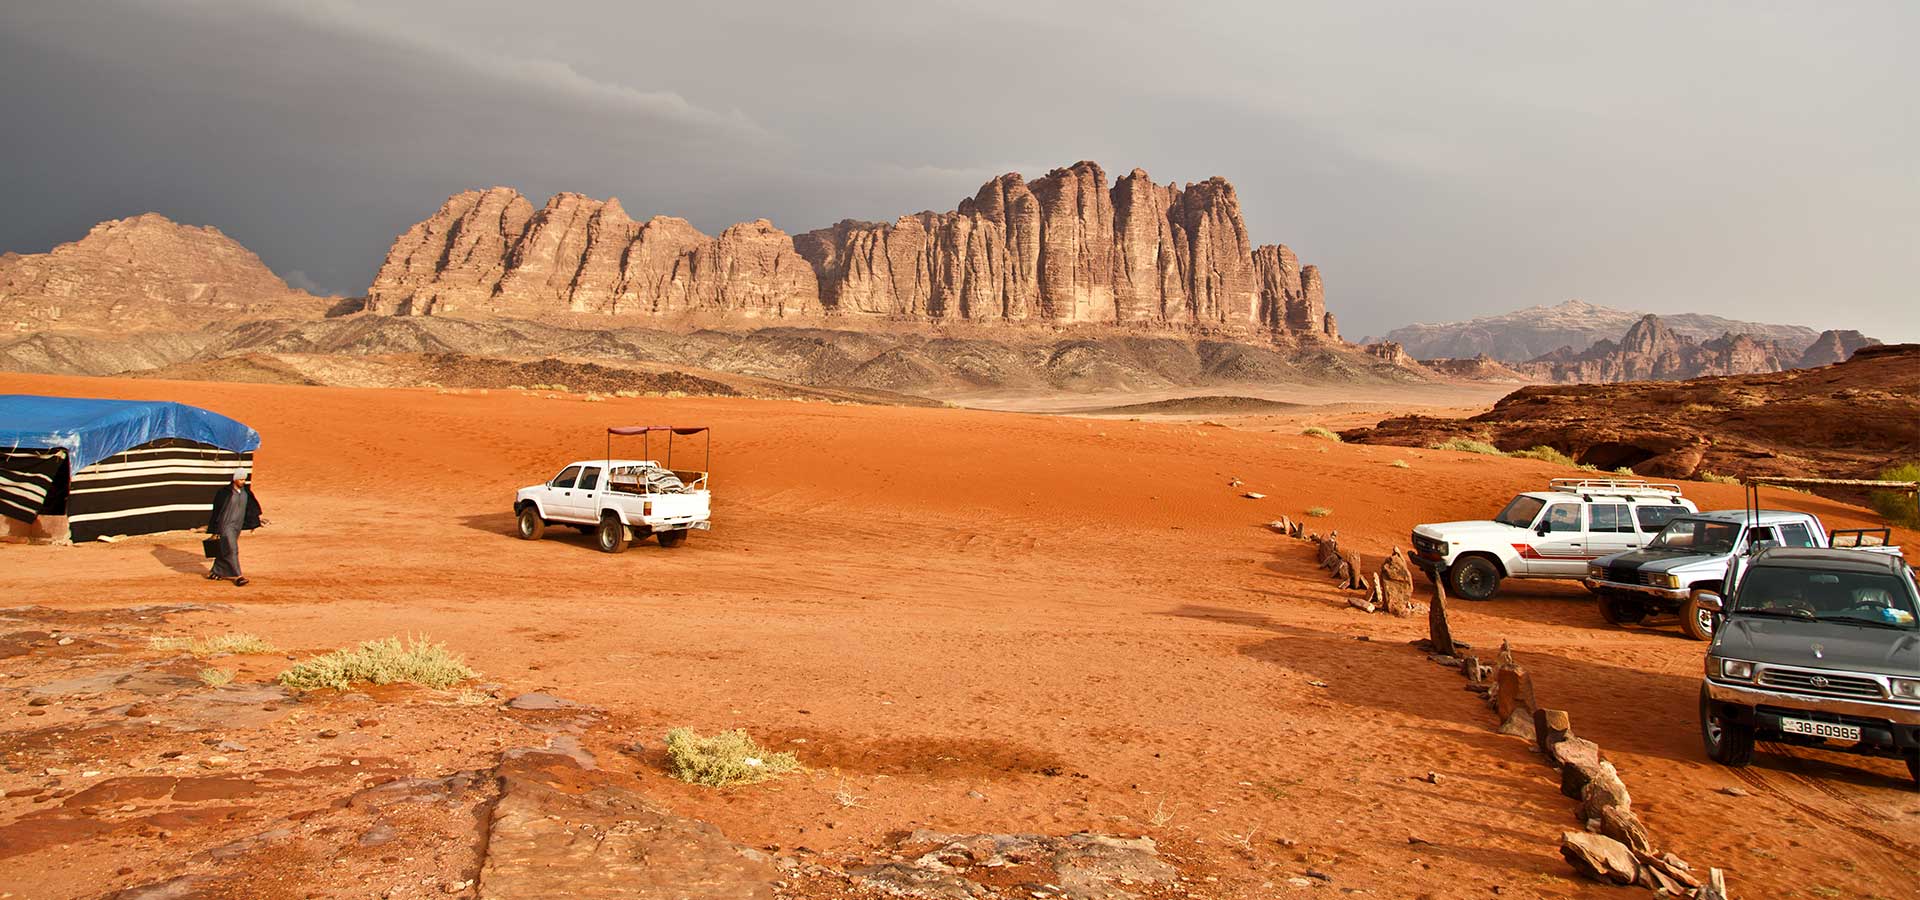 Go Jordan Travel and Tourism Launches Exciting New Jordan Tours